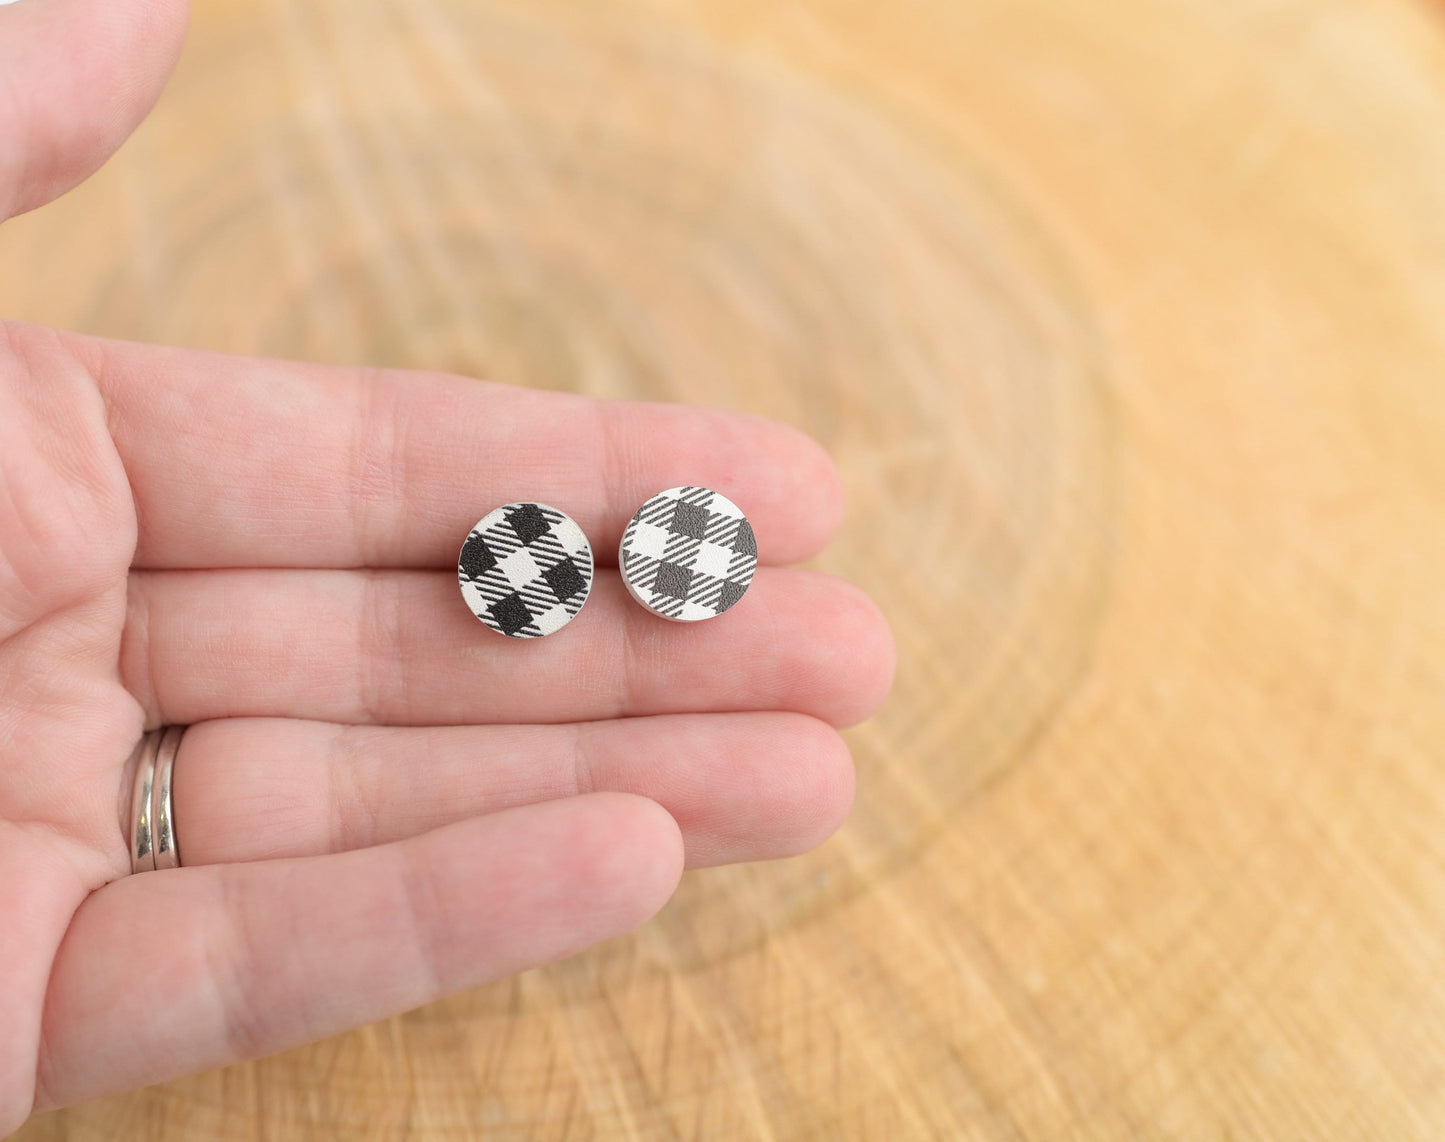 Buffalo Plaid Earrings with Titanium Posts- Choose Green, Red, or White